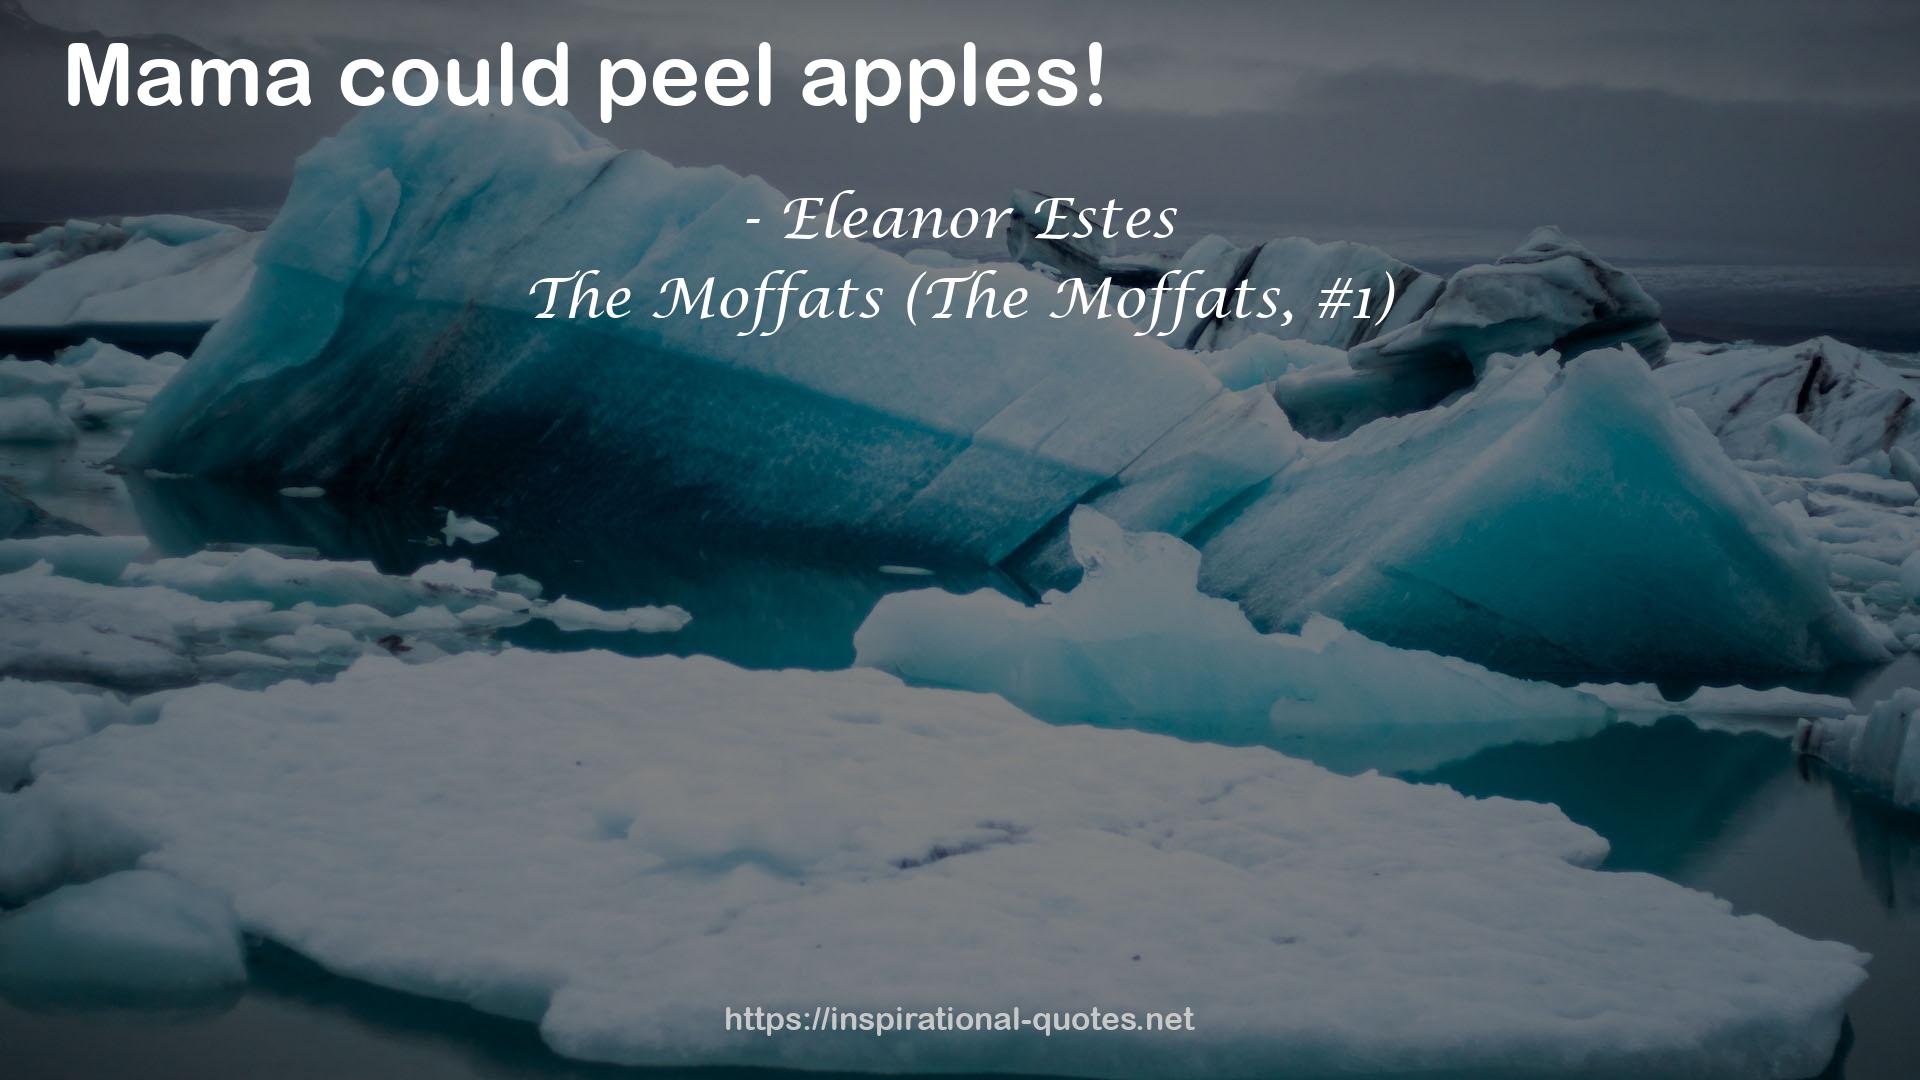 The Moffats (The Moffats, #1) QUOTES